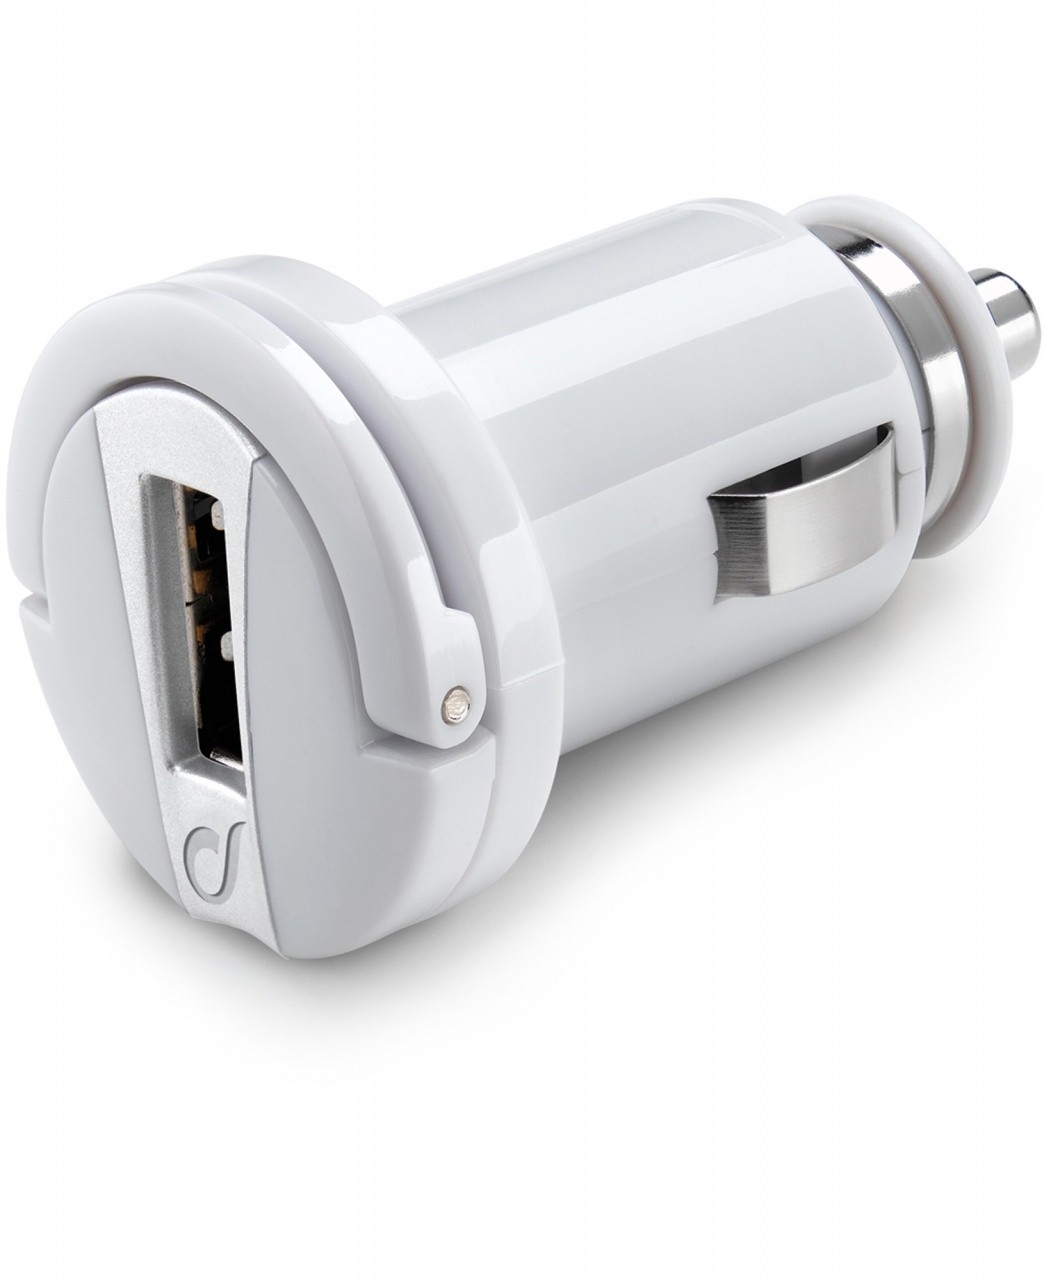 Cellularline USB Car Charger Ultra - Fast Charge Universale Micro caricabatterie da auto U...